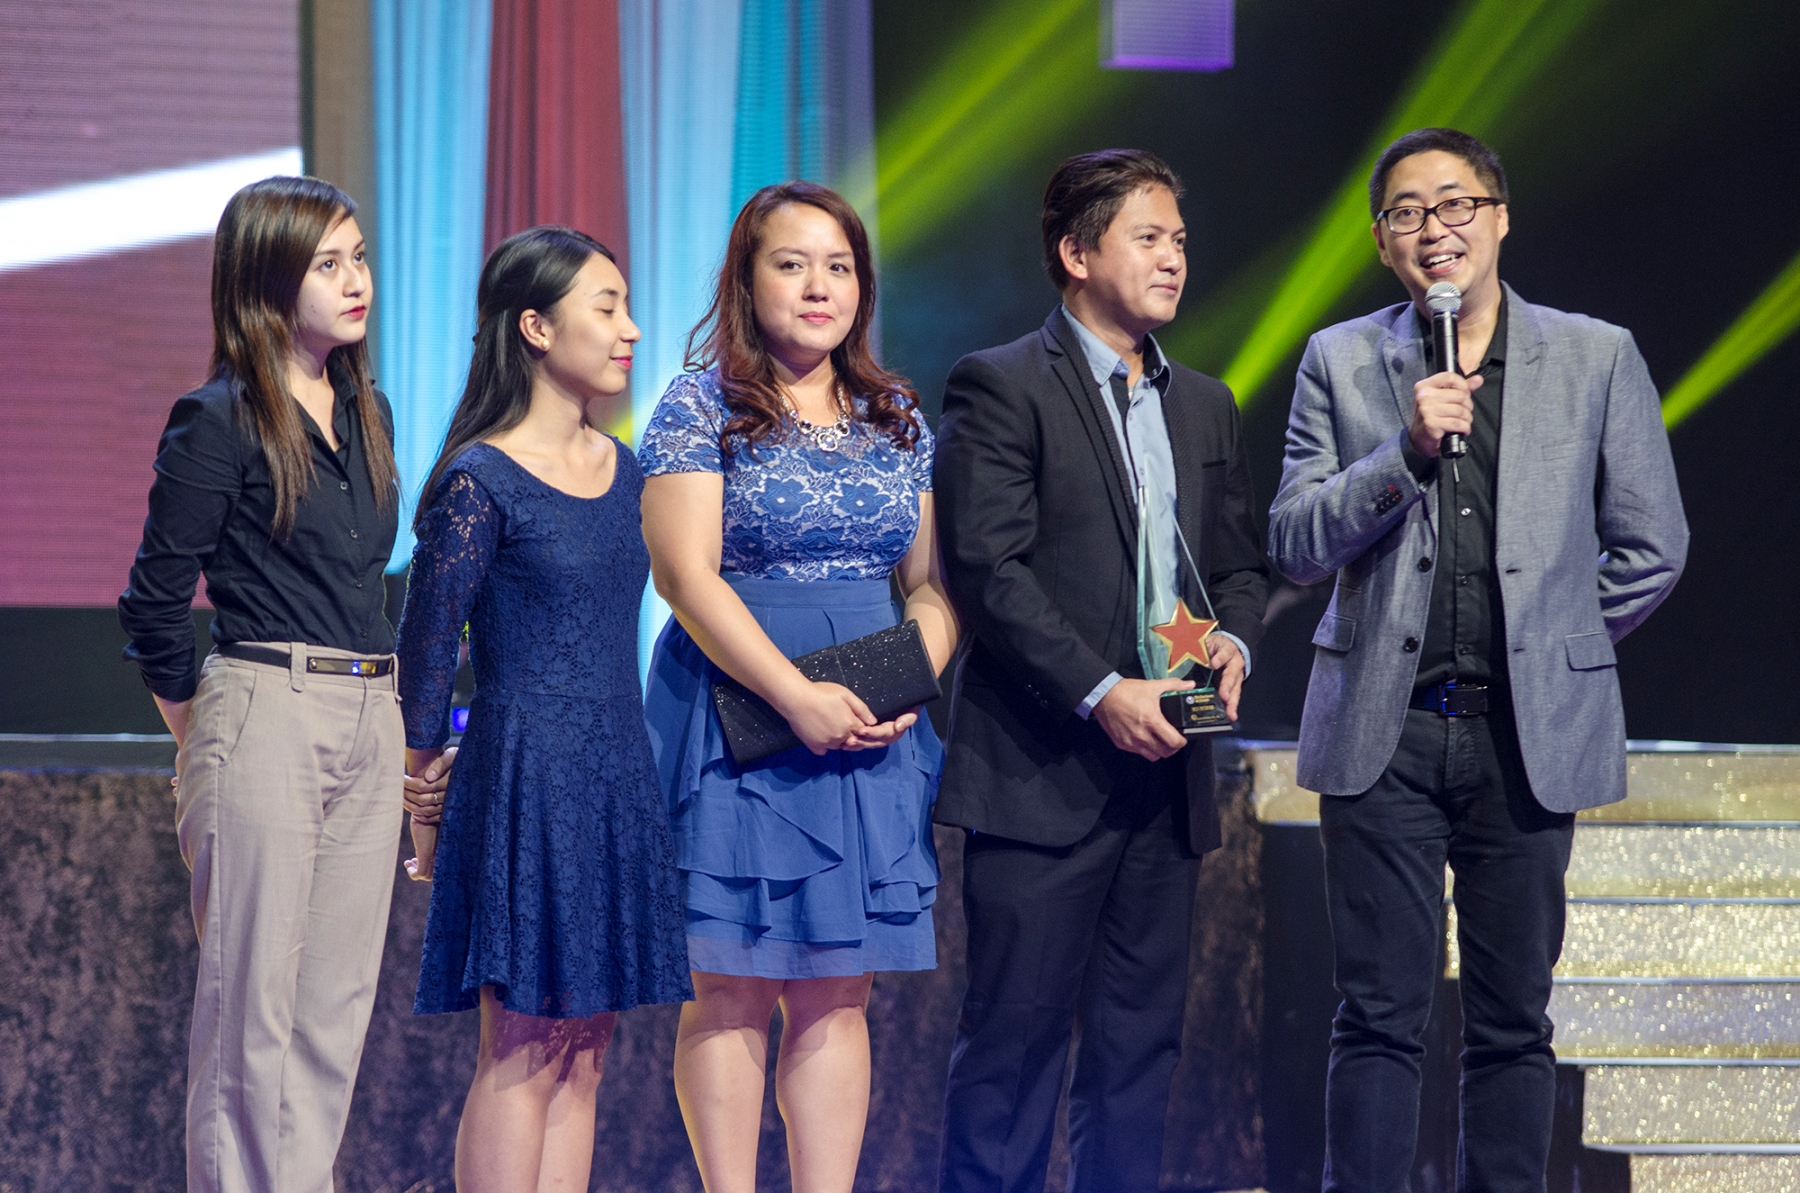 IN PHOTOS: Alden, Maja, Toni, more at the PMPC Star Awards for ...